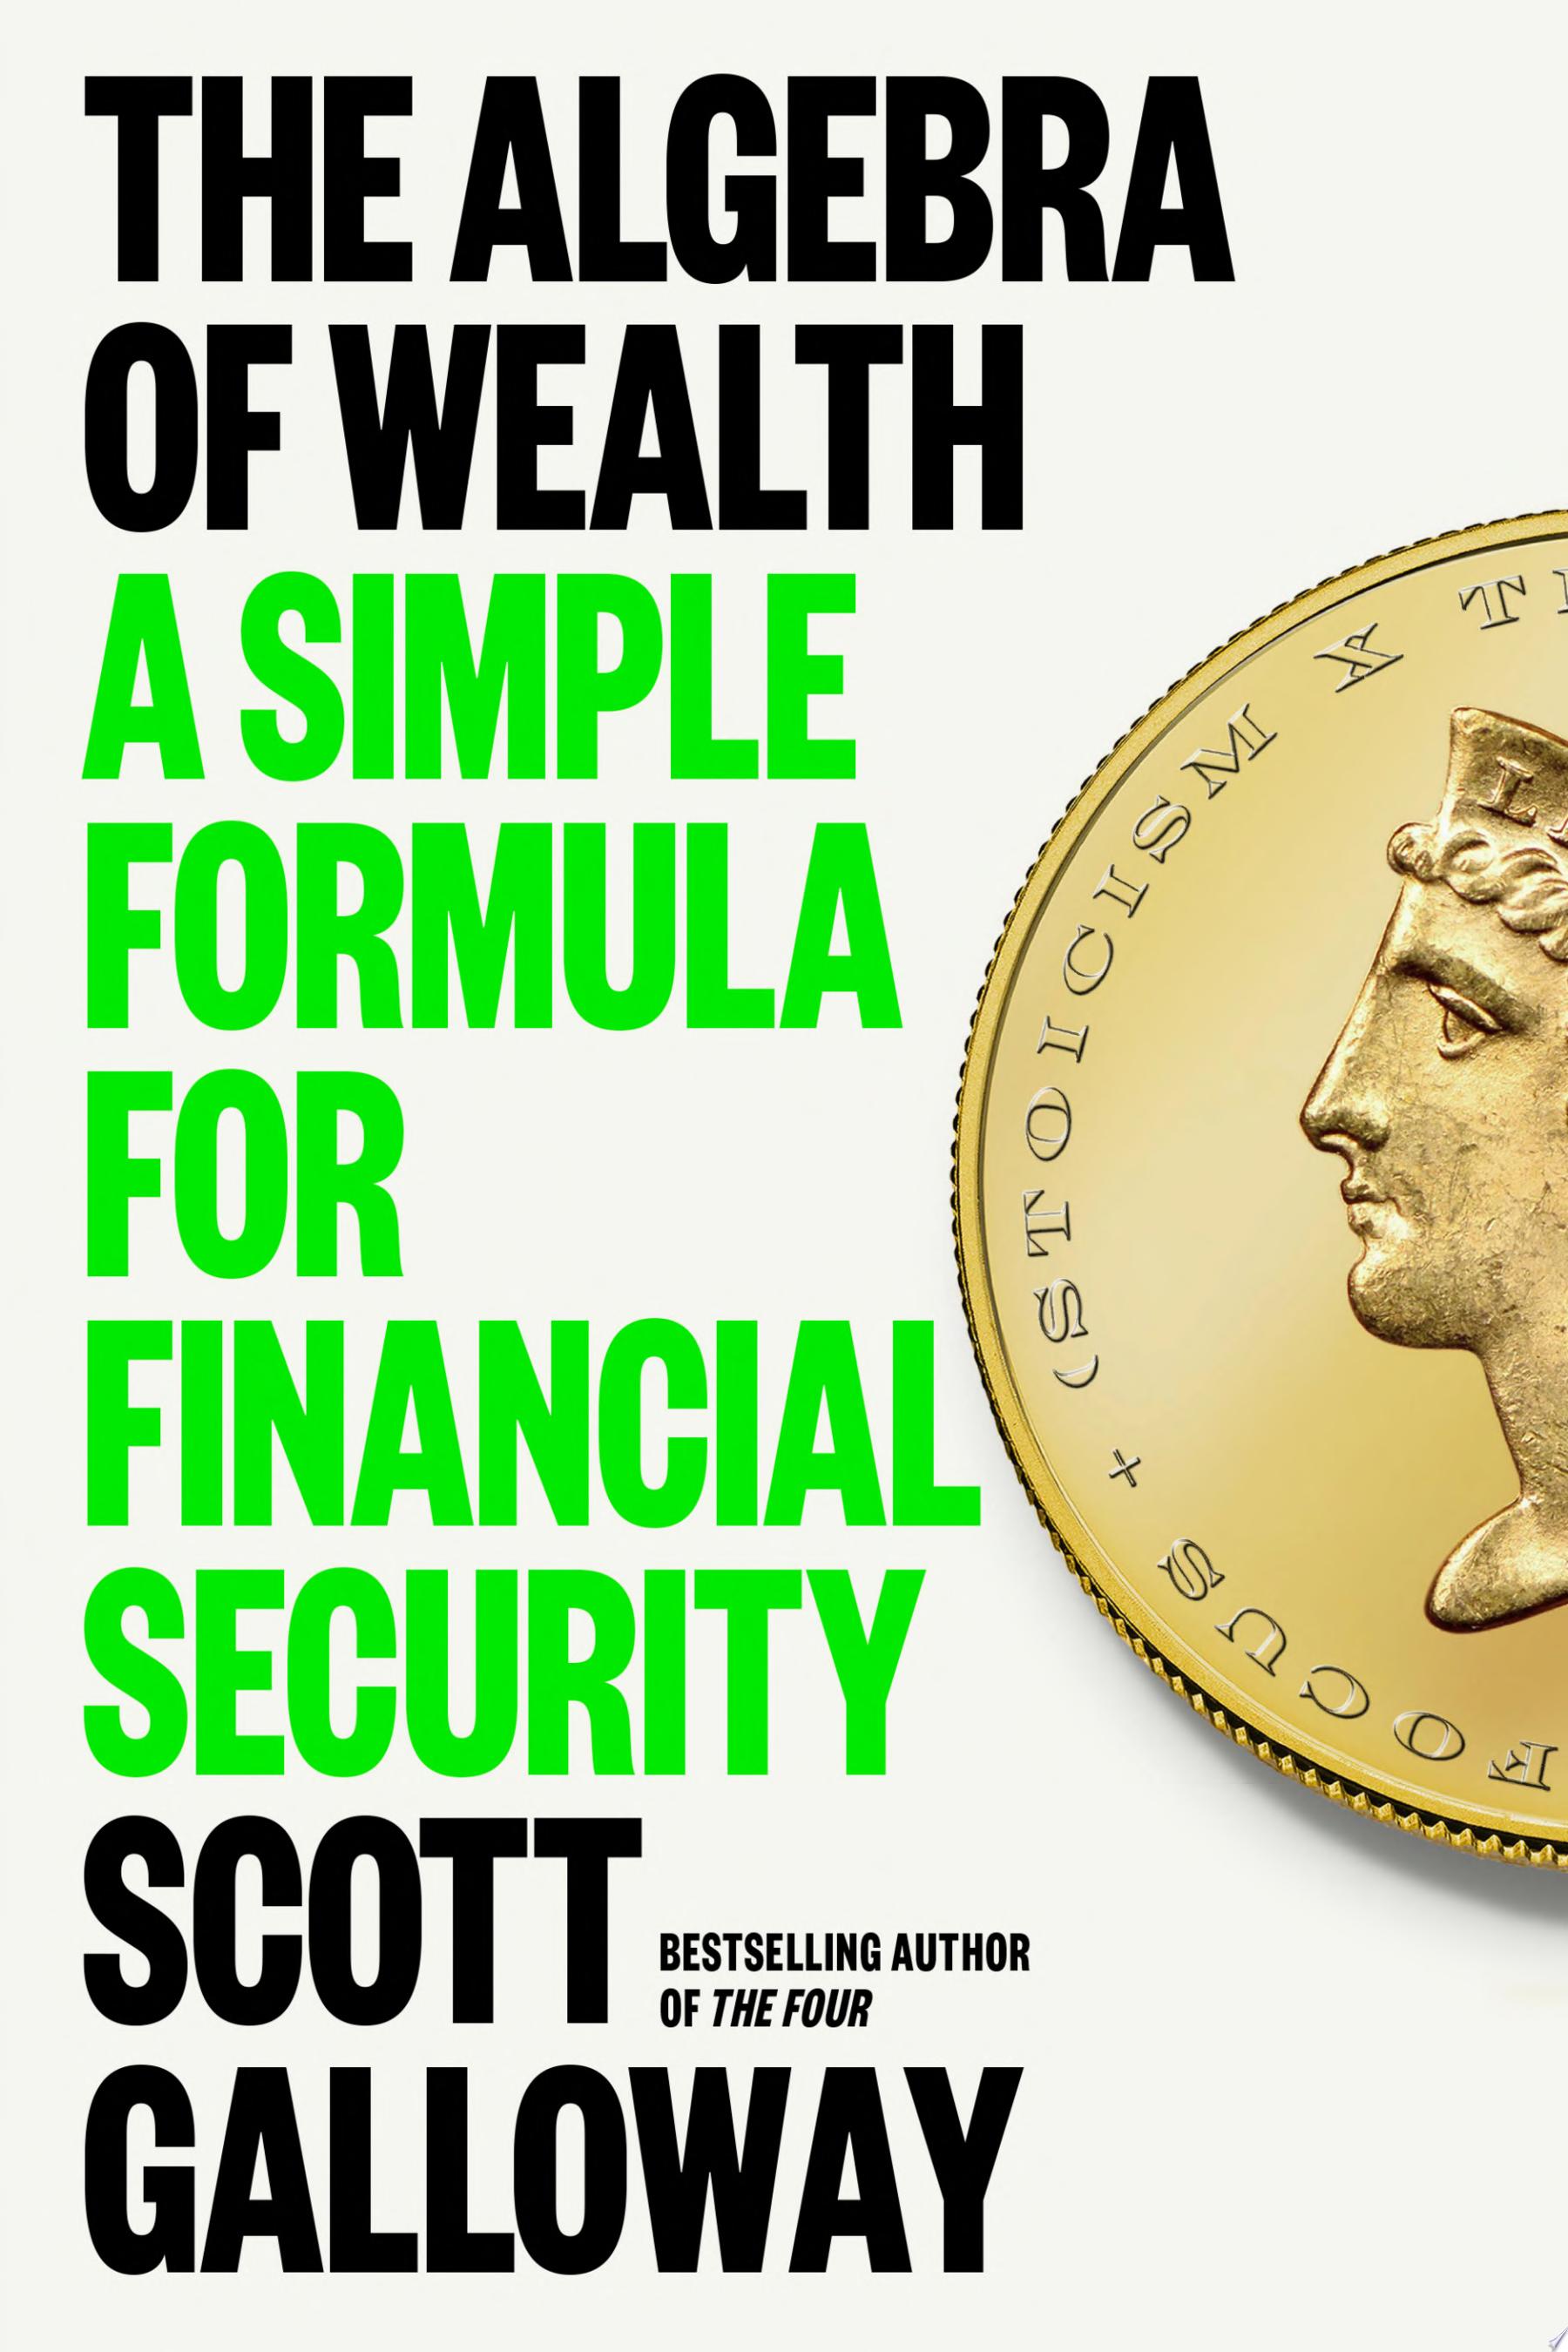 Image for "The Algebra of Wealth"